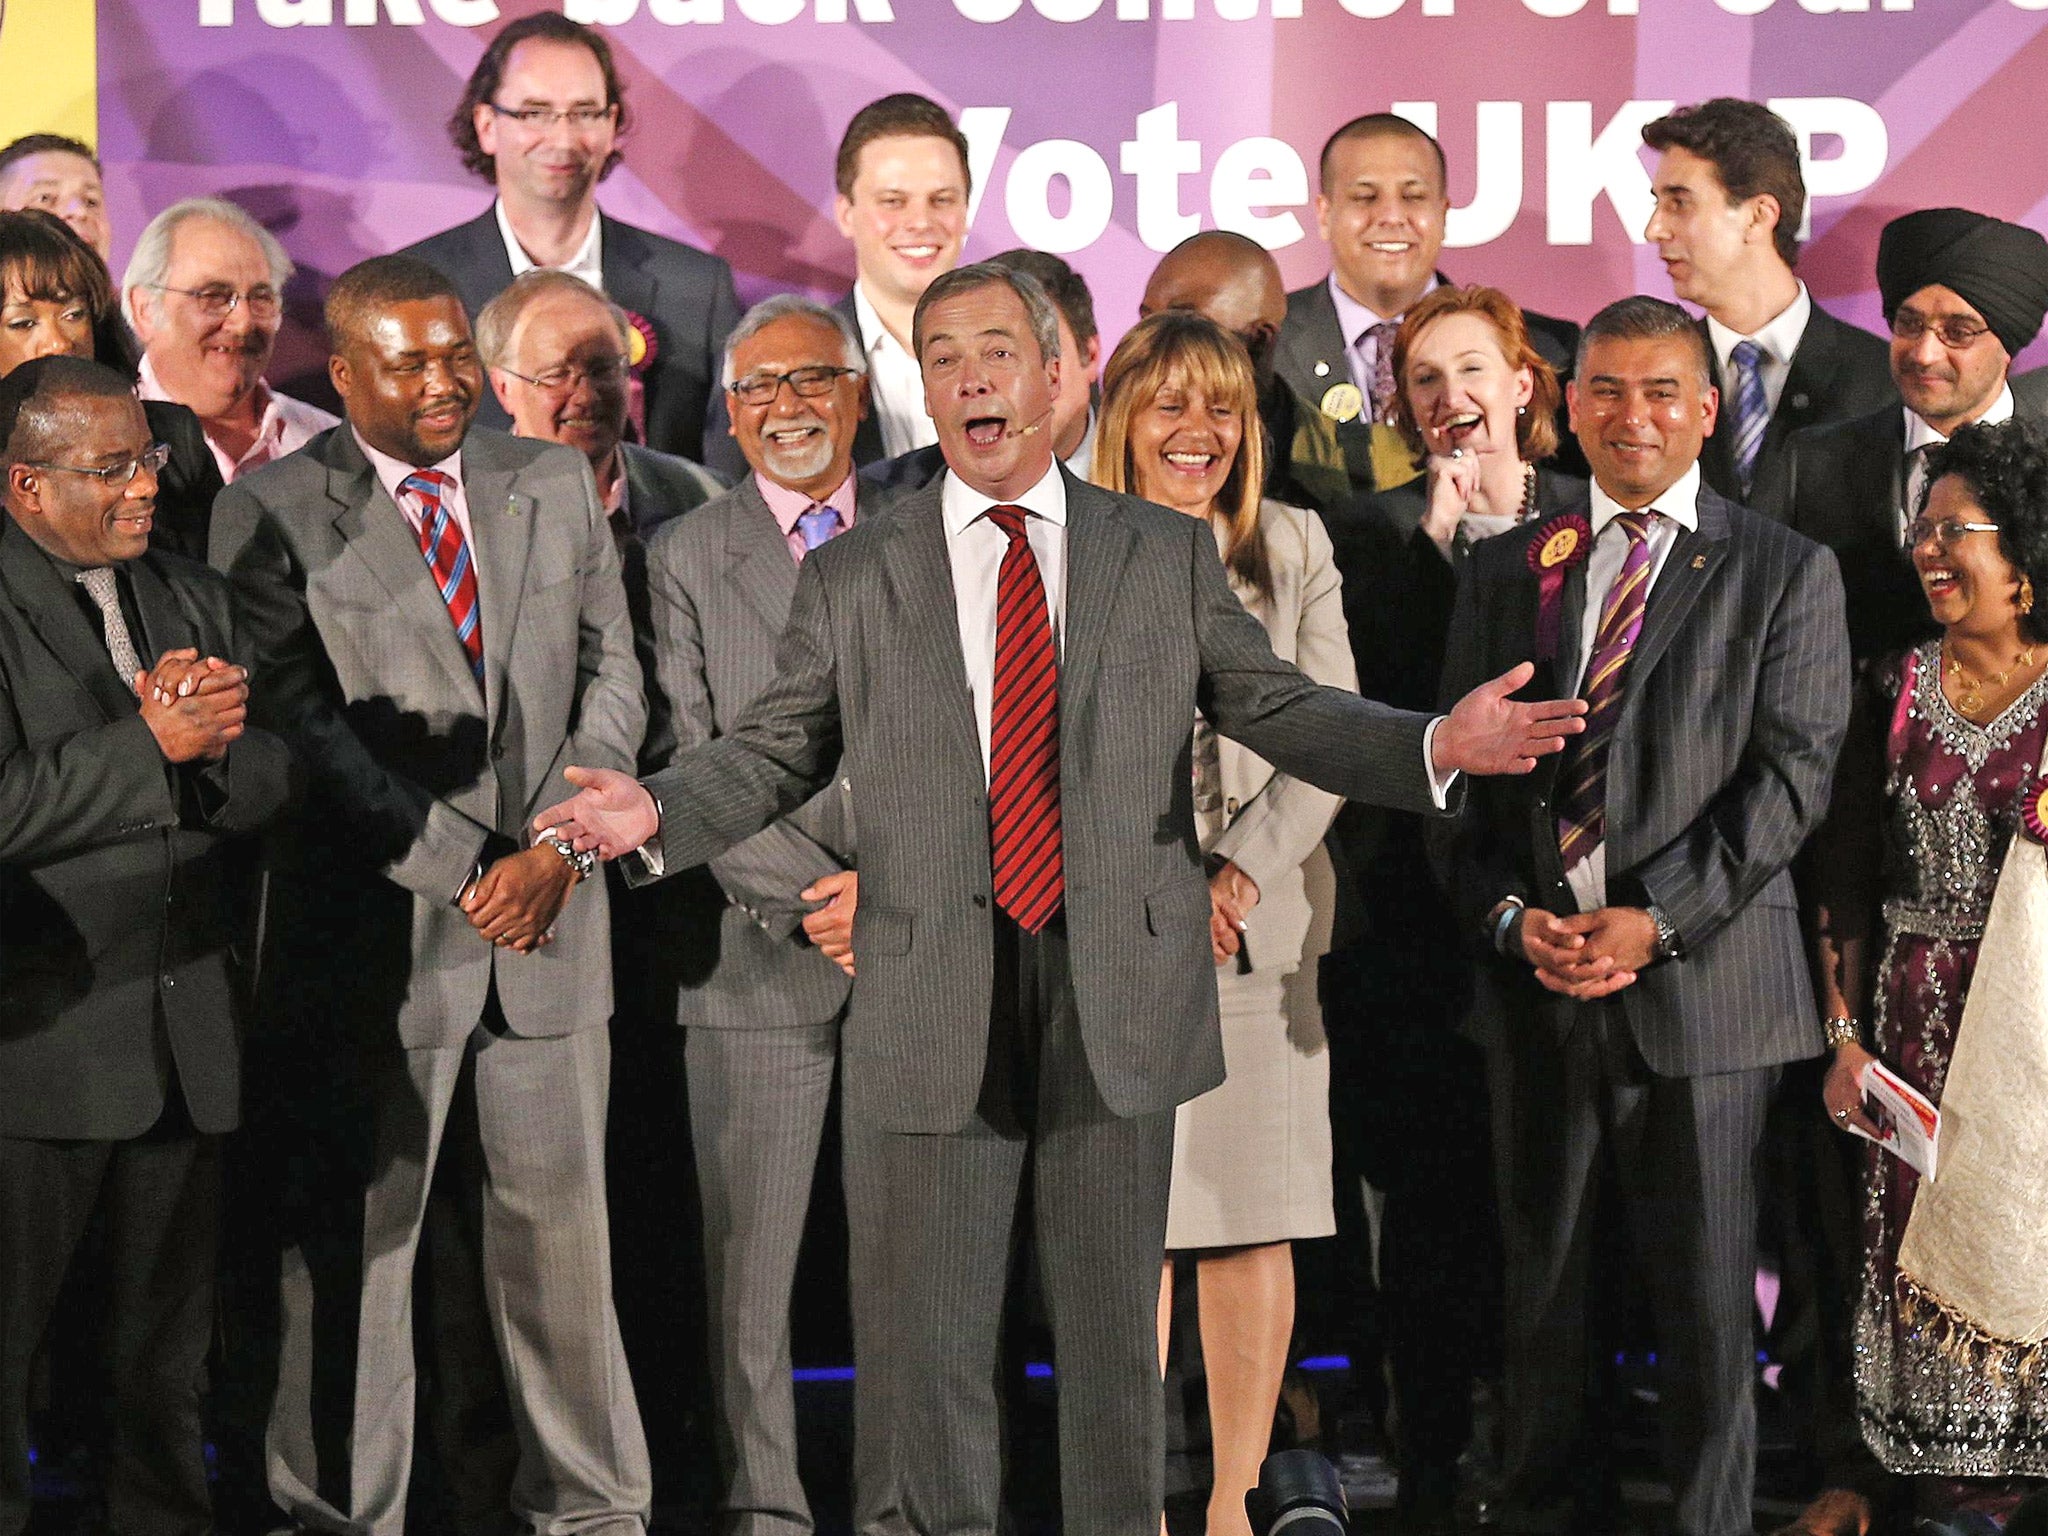 Nigel Farage (centre) speaks on stage during a Ukip rally held at the Emmanuel Centre, London